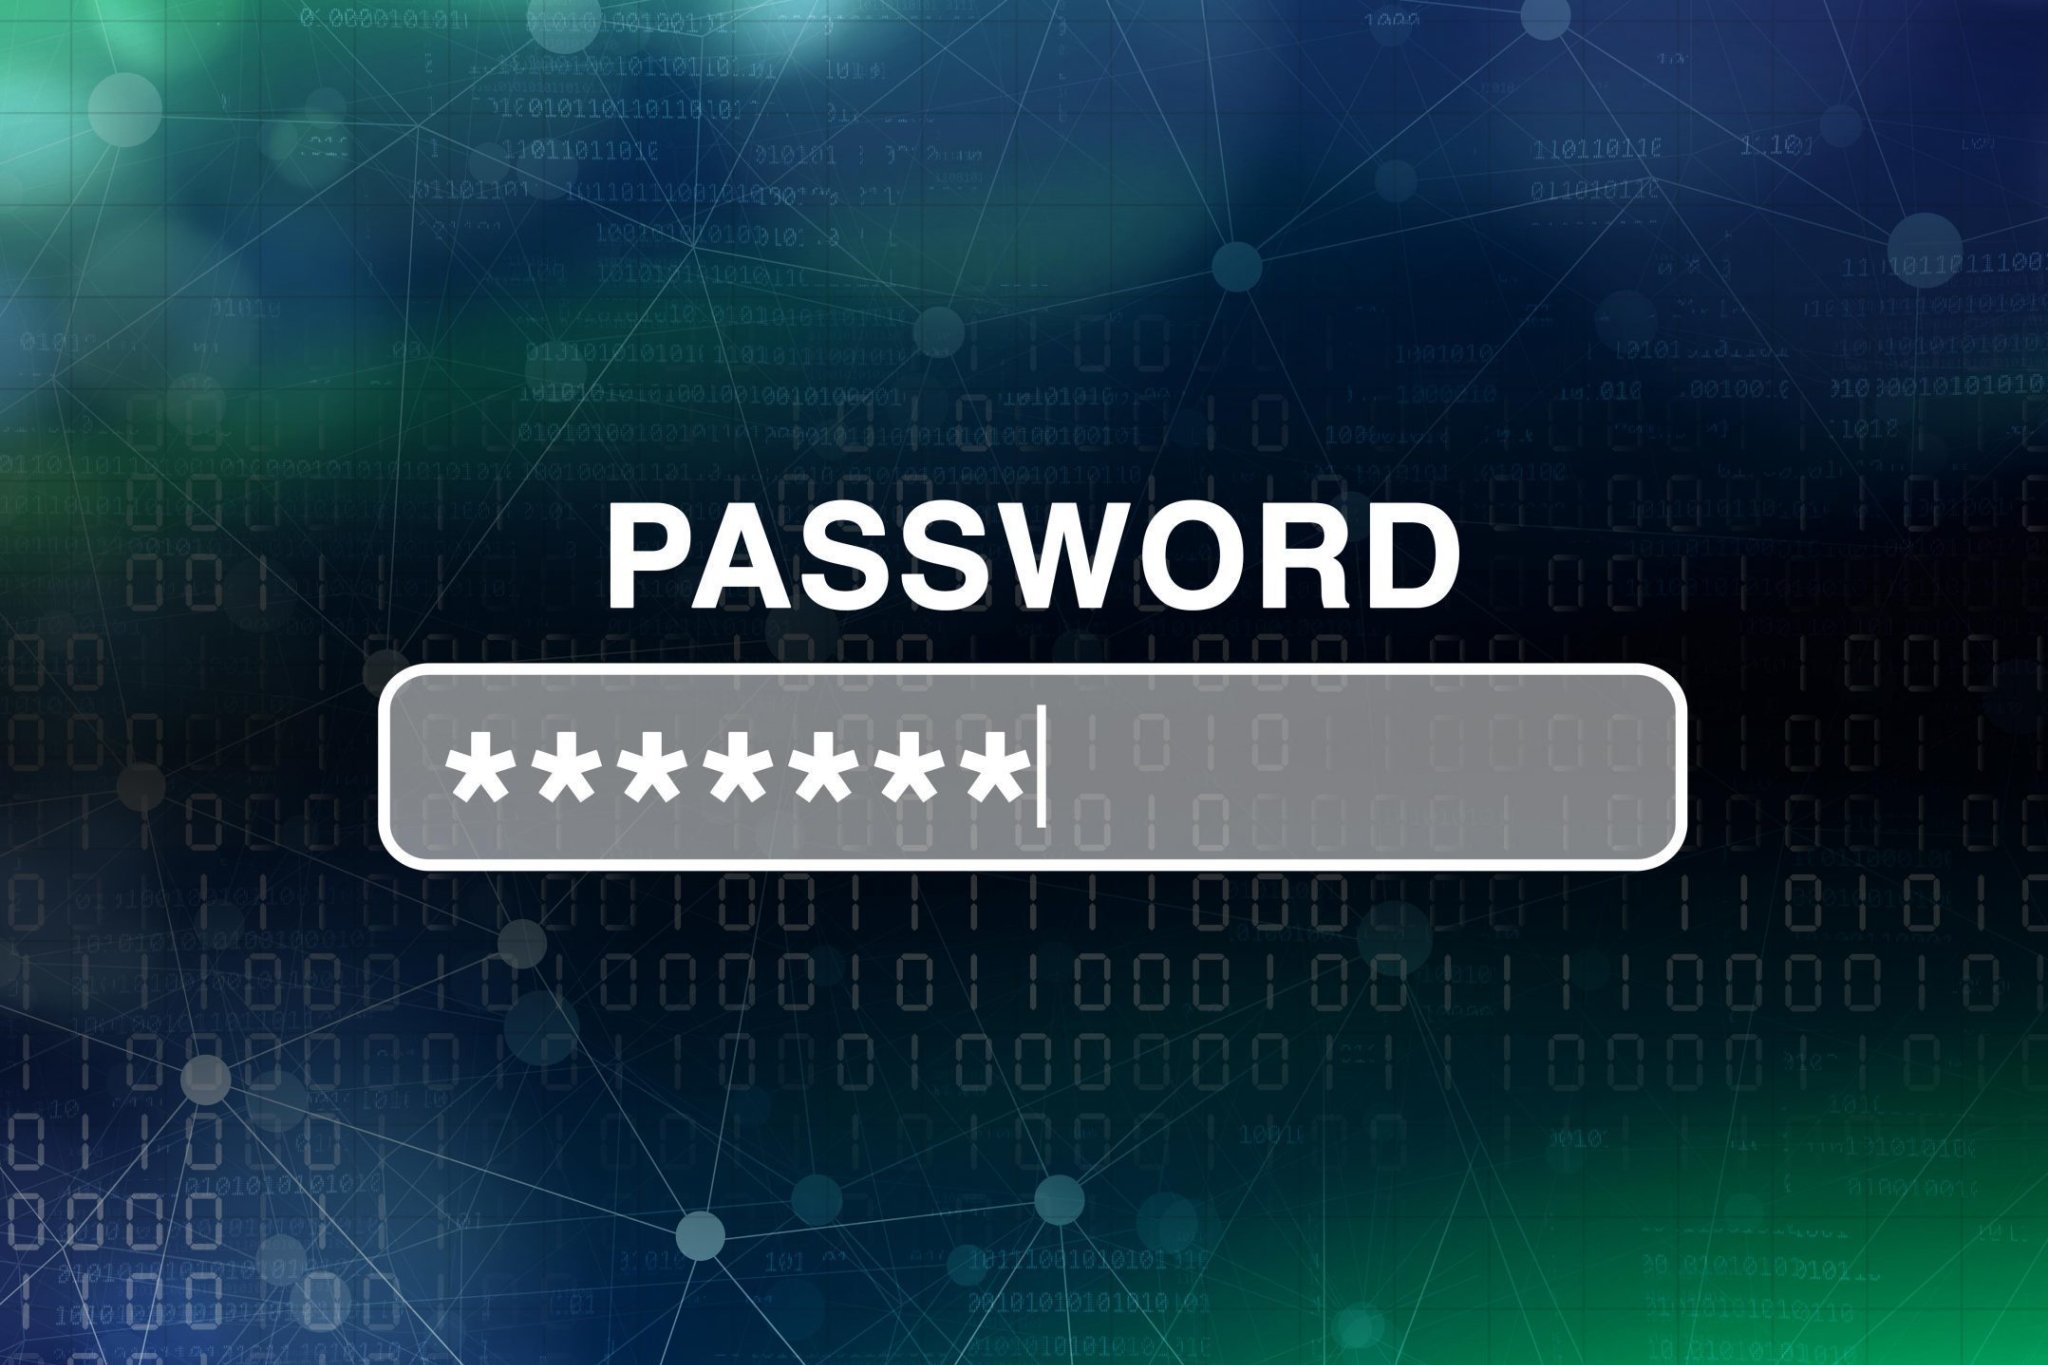 These Are the Most Common Passwords—Do Yours Make the List?